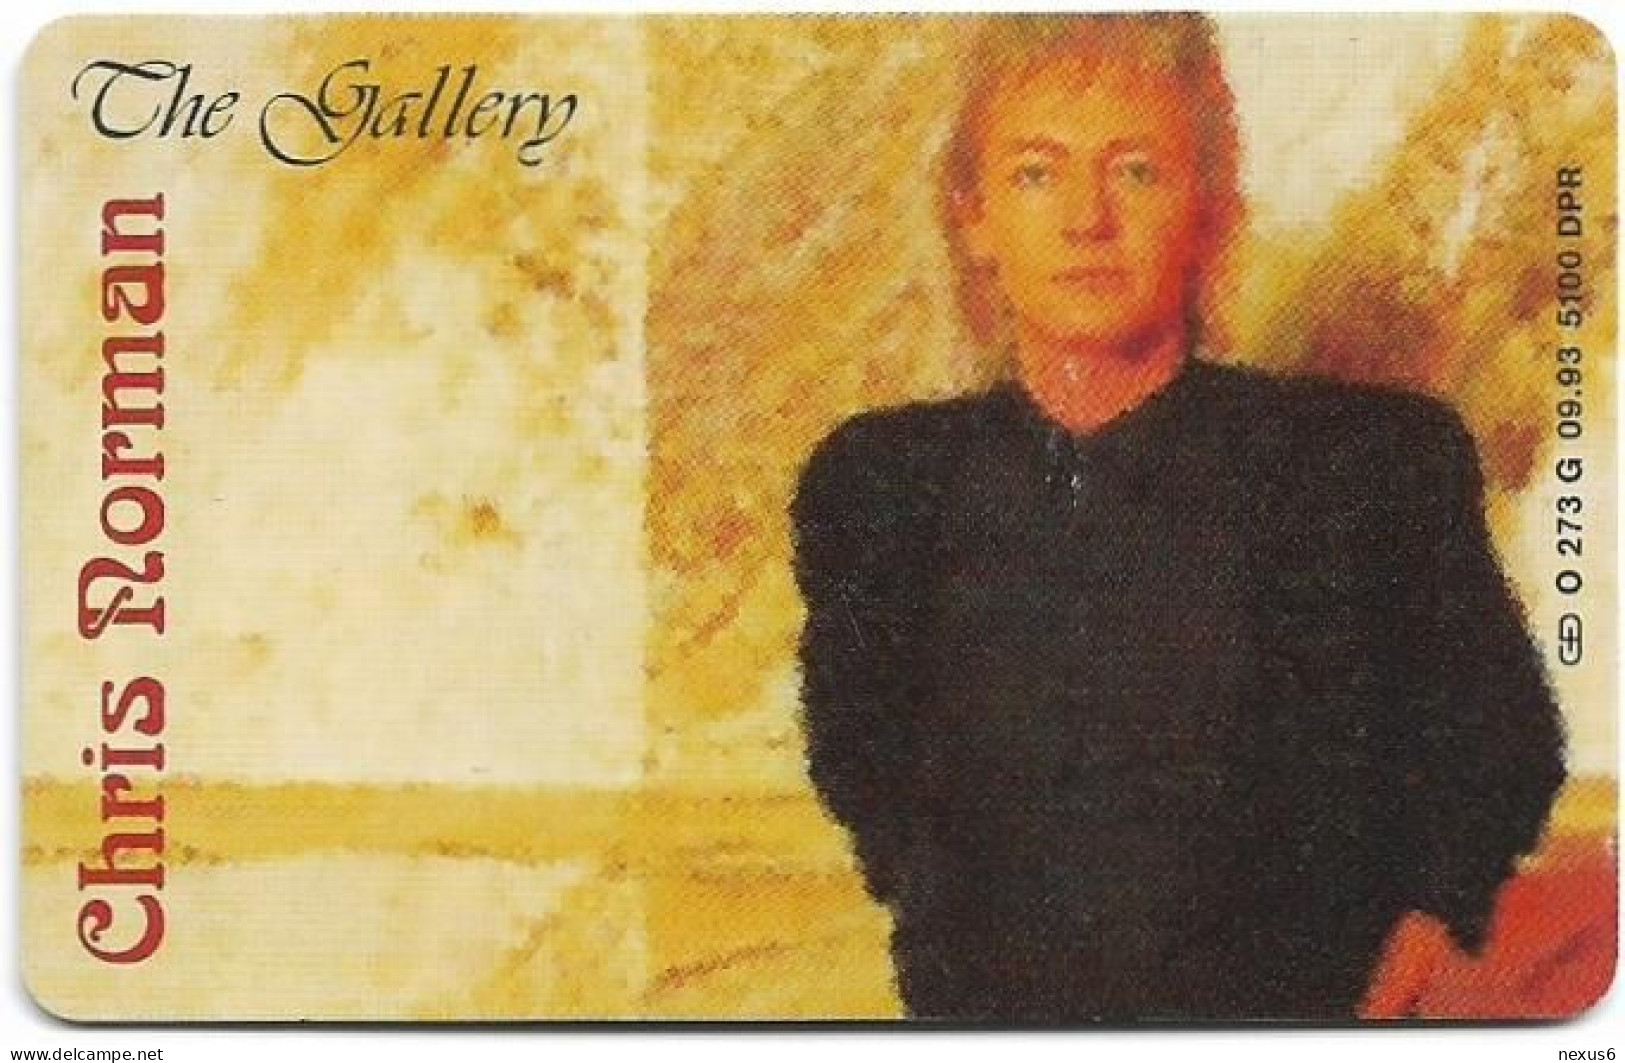 Germany - The Gallery 7 - Chris Norman - O 0273G - 09.1993, 6DM, 5.100ex, Used - O-Series : Séries Client